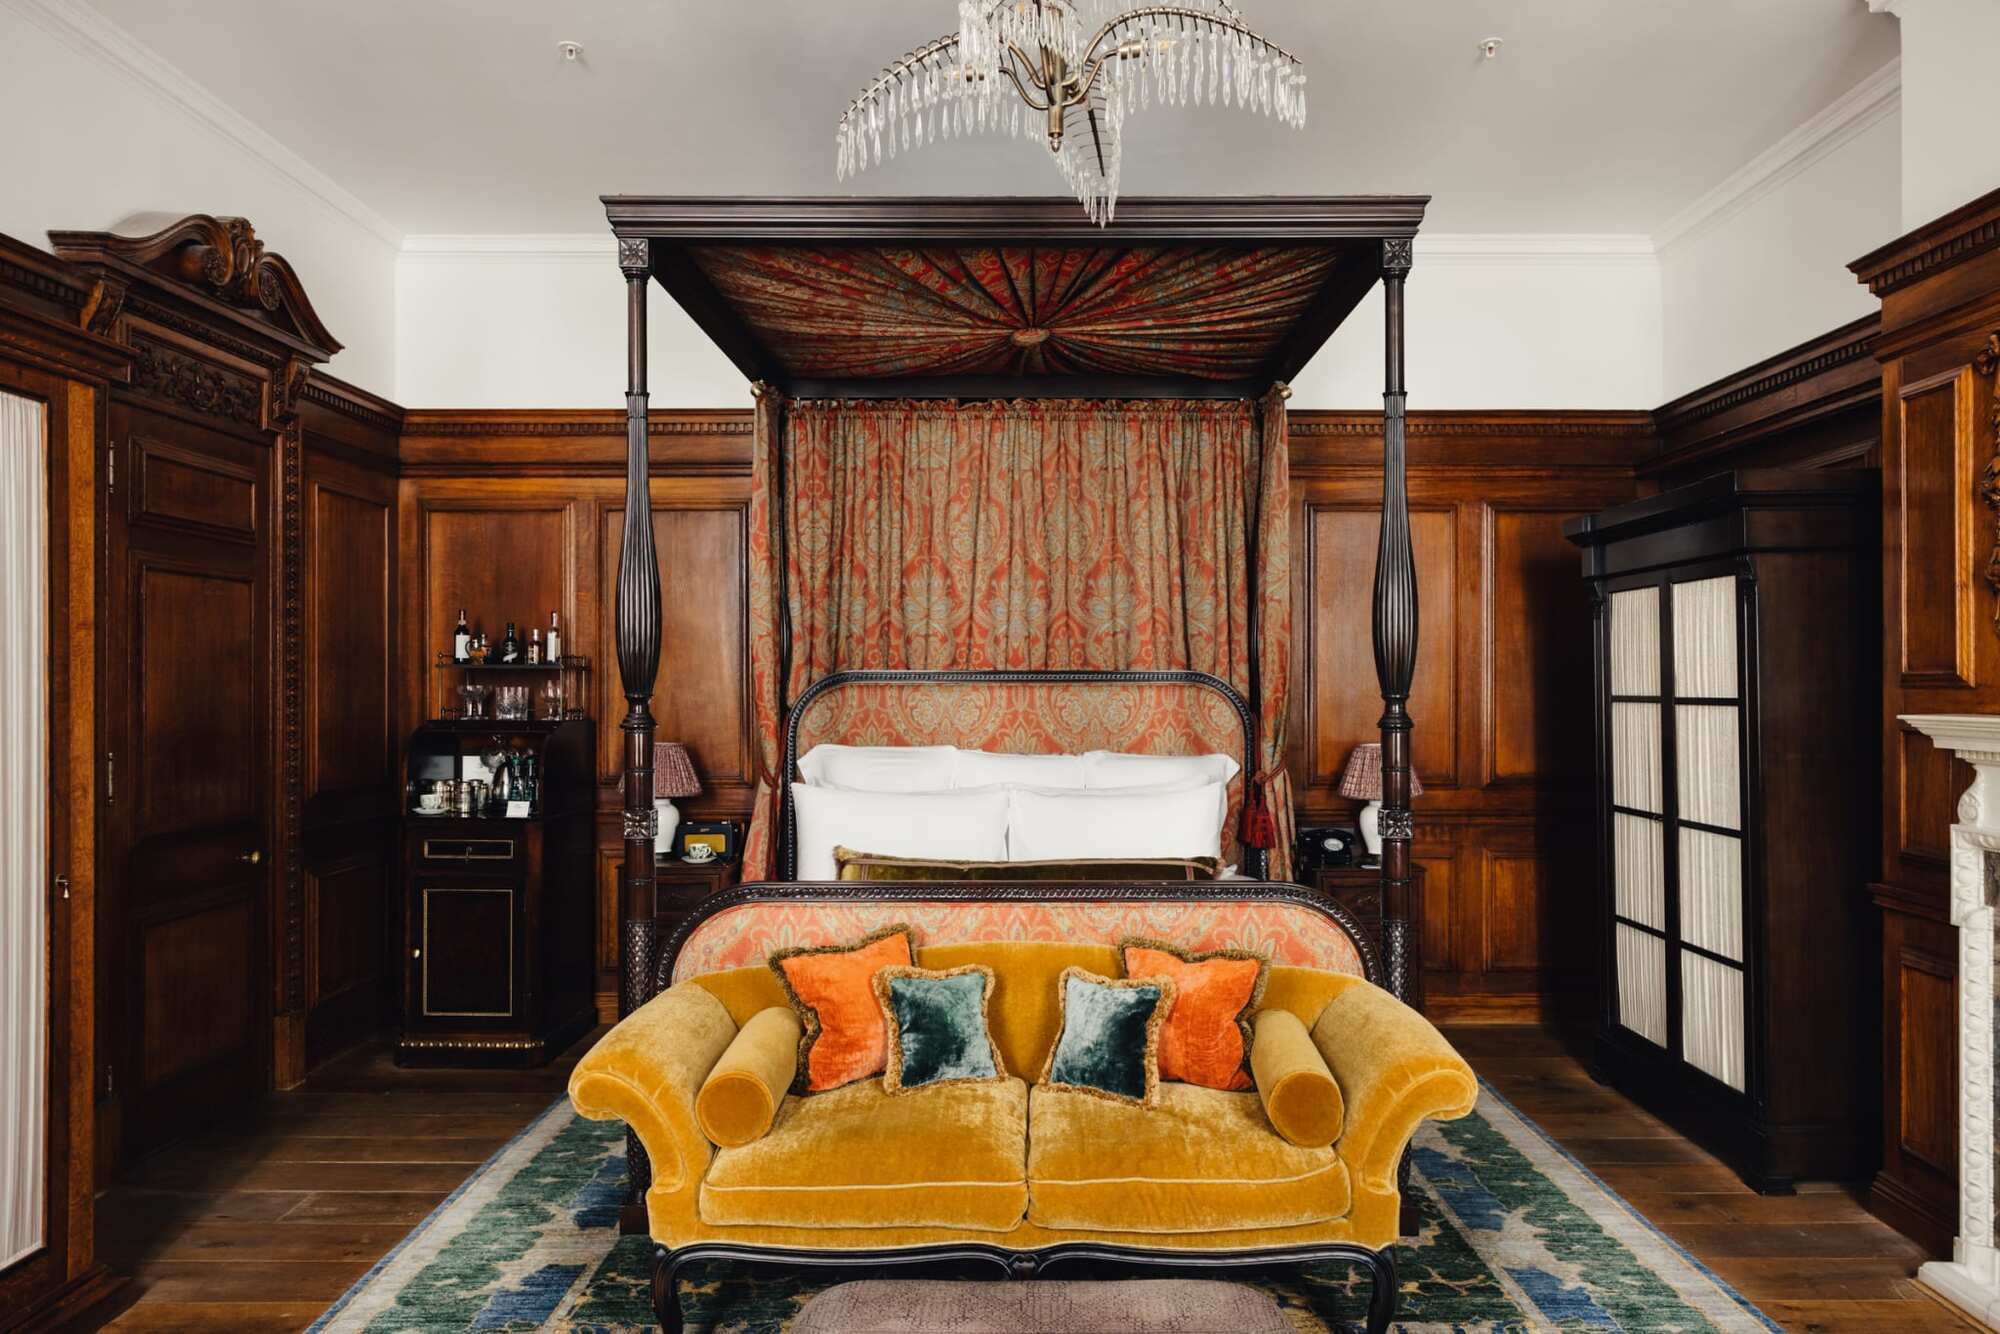 The most romantic hotels in London for dates and special weekends. The best stops for couples